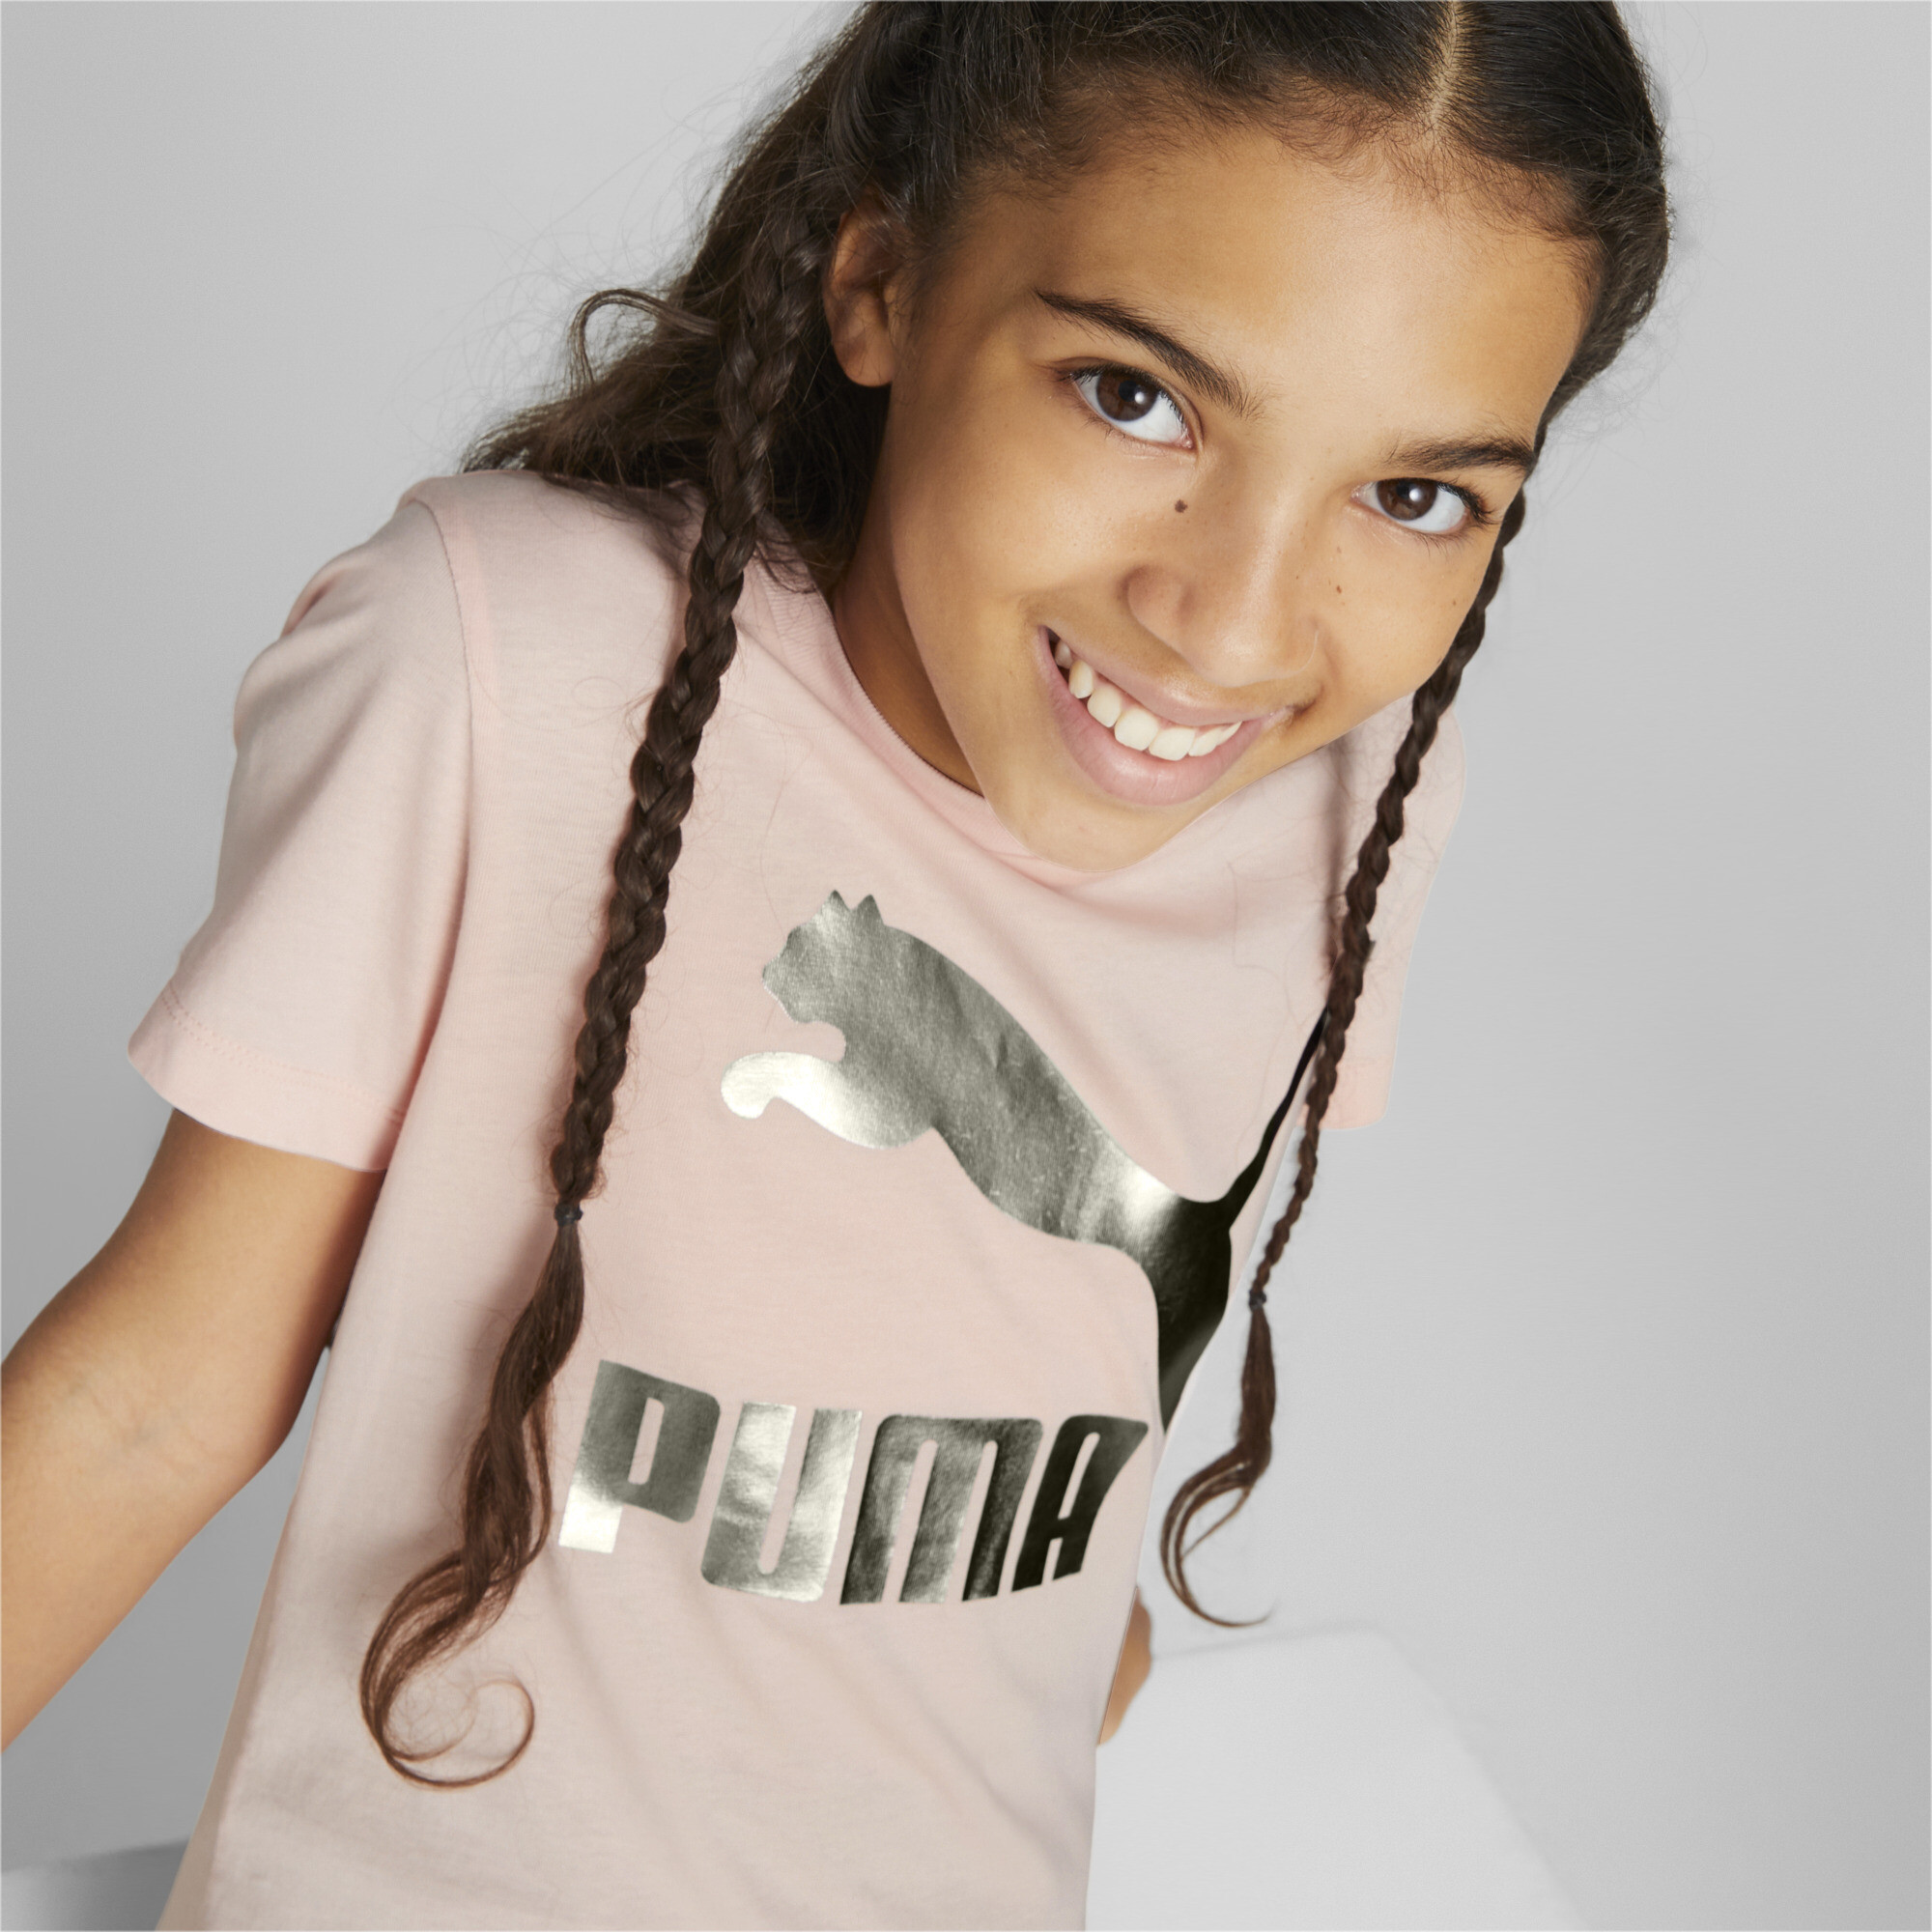 PUMA Classics Logo T-Shirt In Pink, Size 4-5 Youth